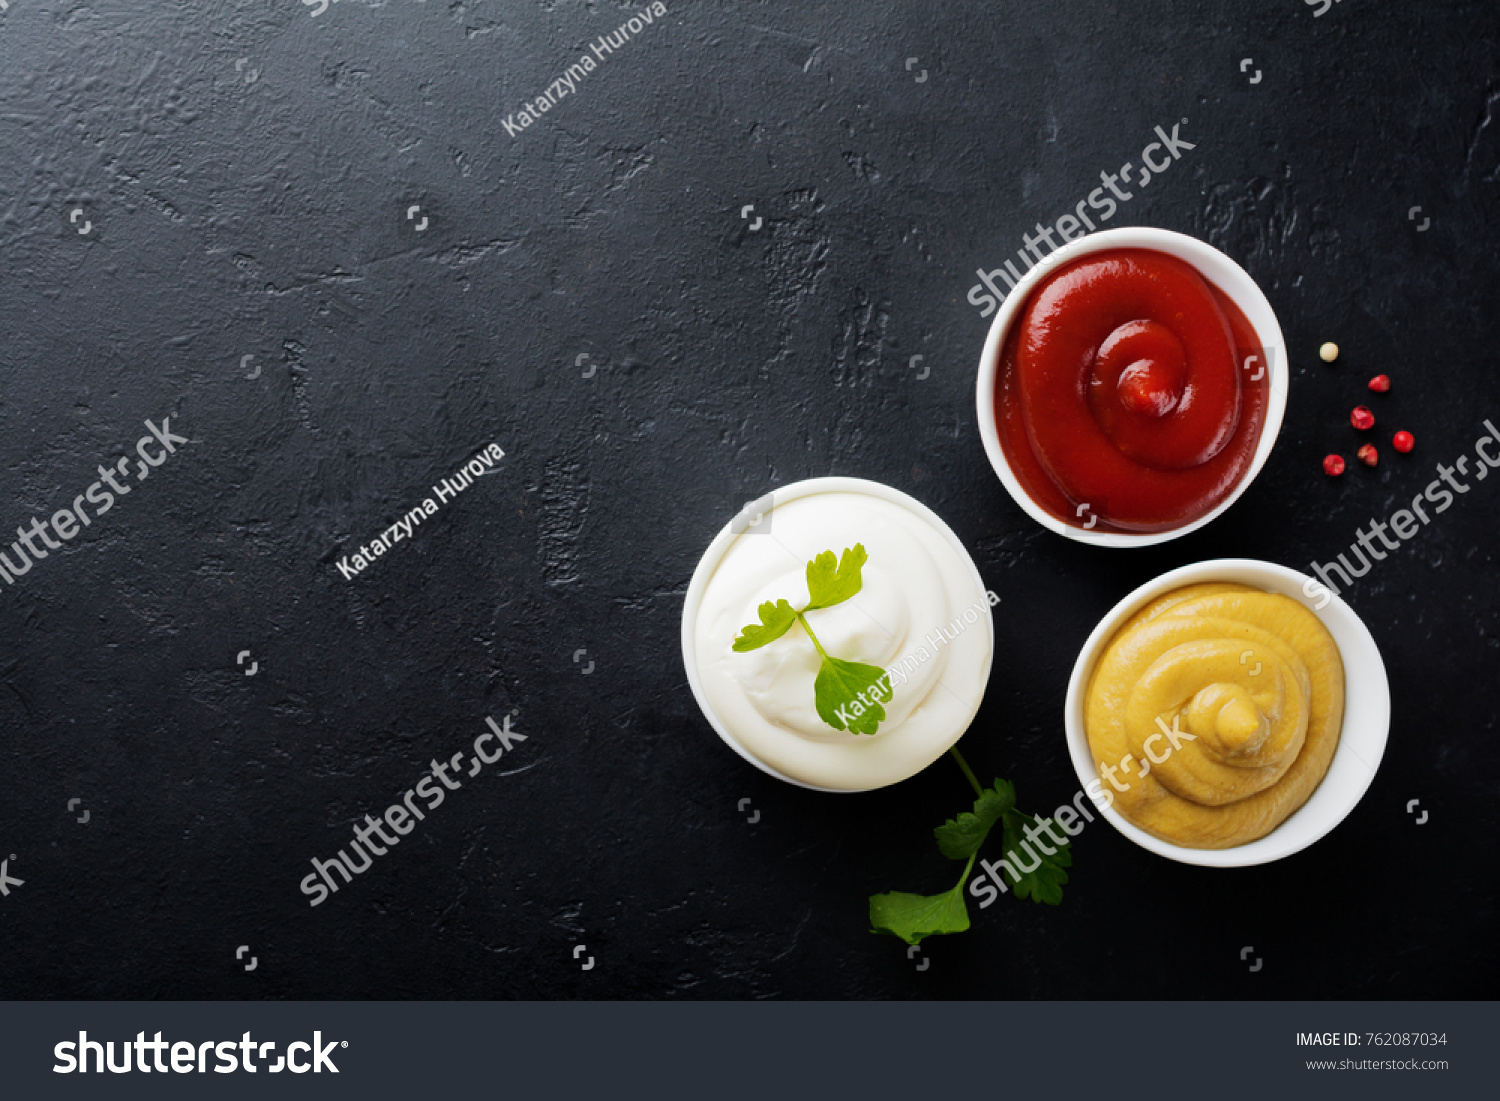 Set of three sauces - mayonnaise, mustard and ketchup in white ceramic bowls on  black stone or concrete background. Selective focus. Top view. #762087034